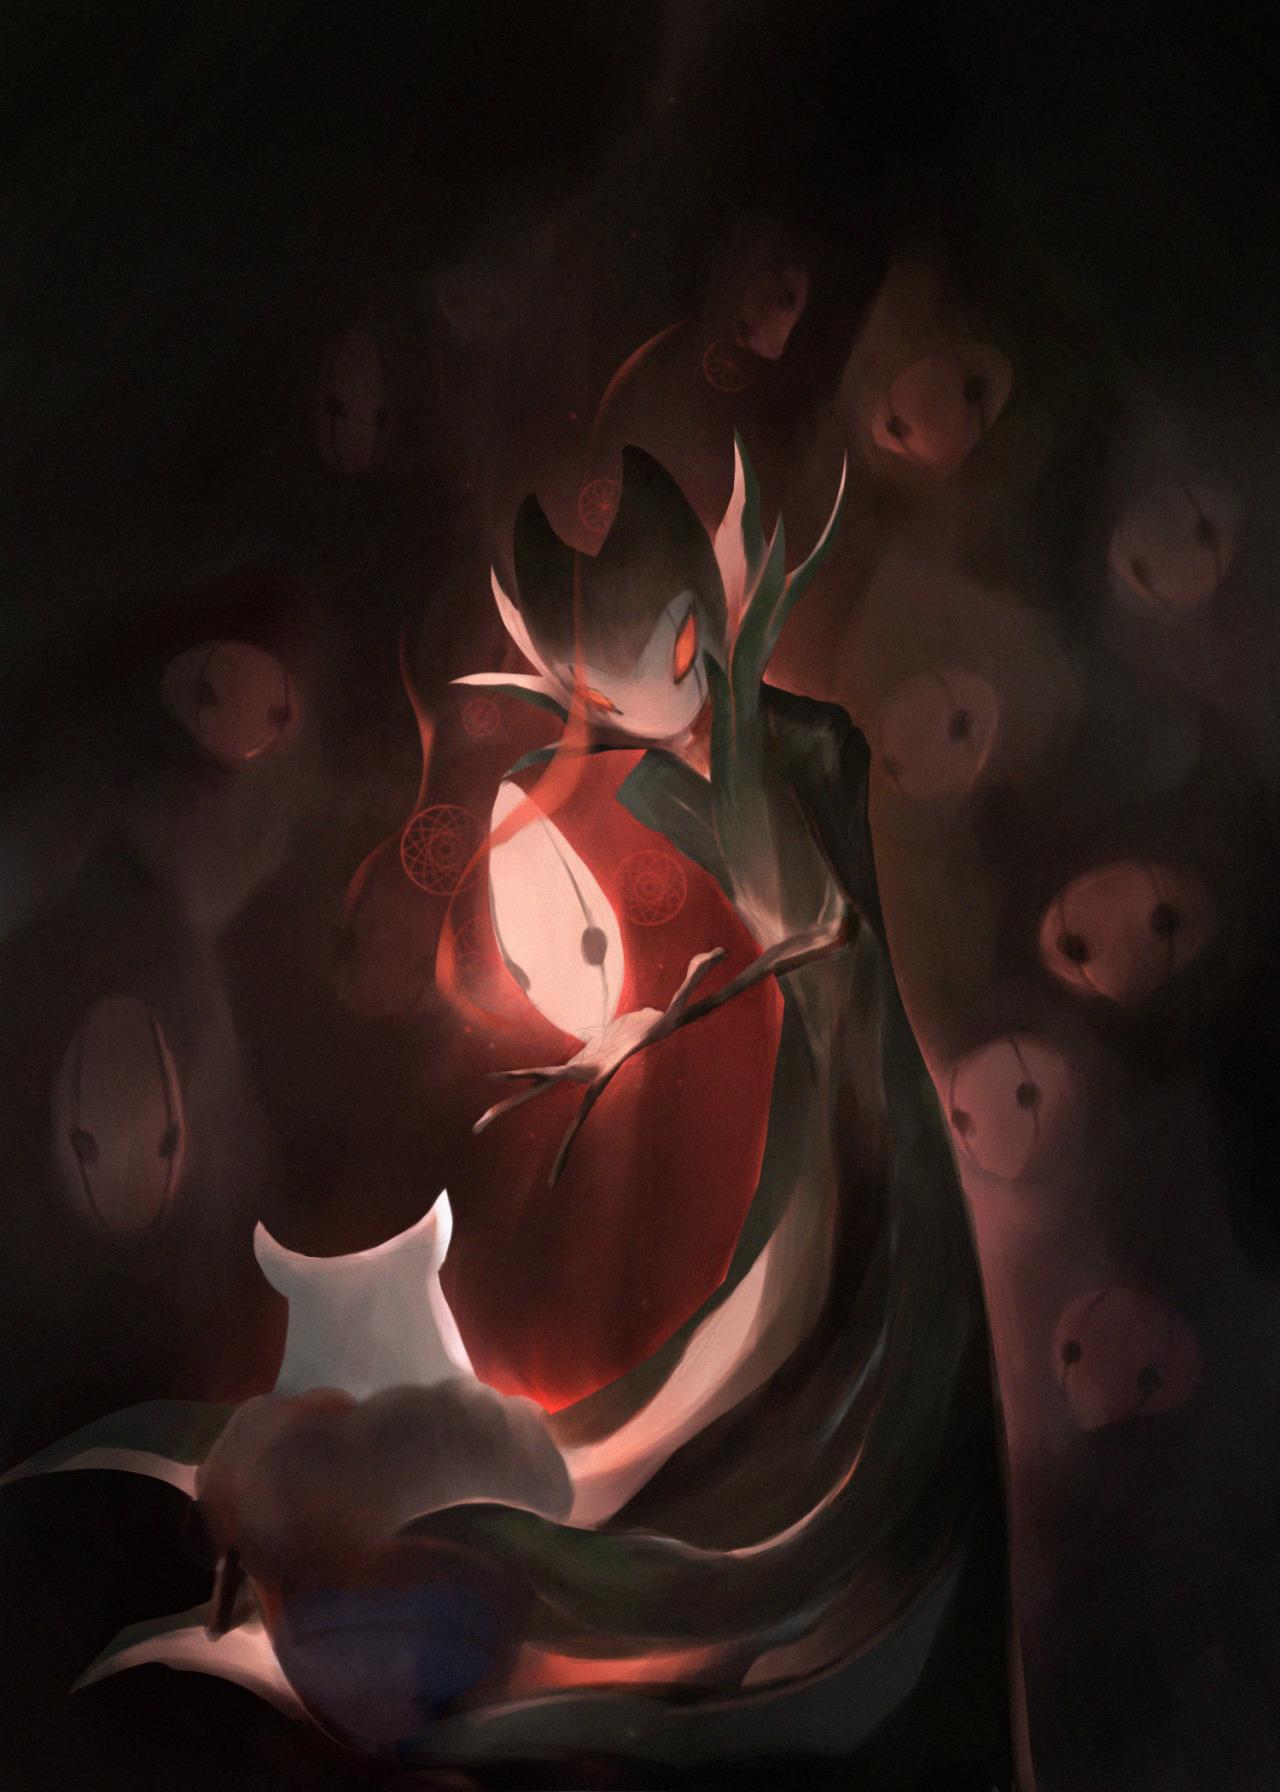 hollow knight grimm troupe wallpaper art